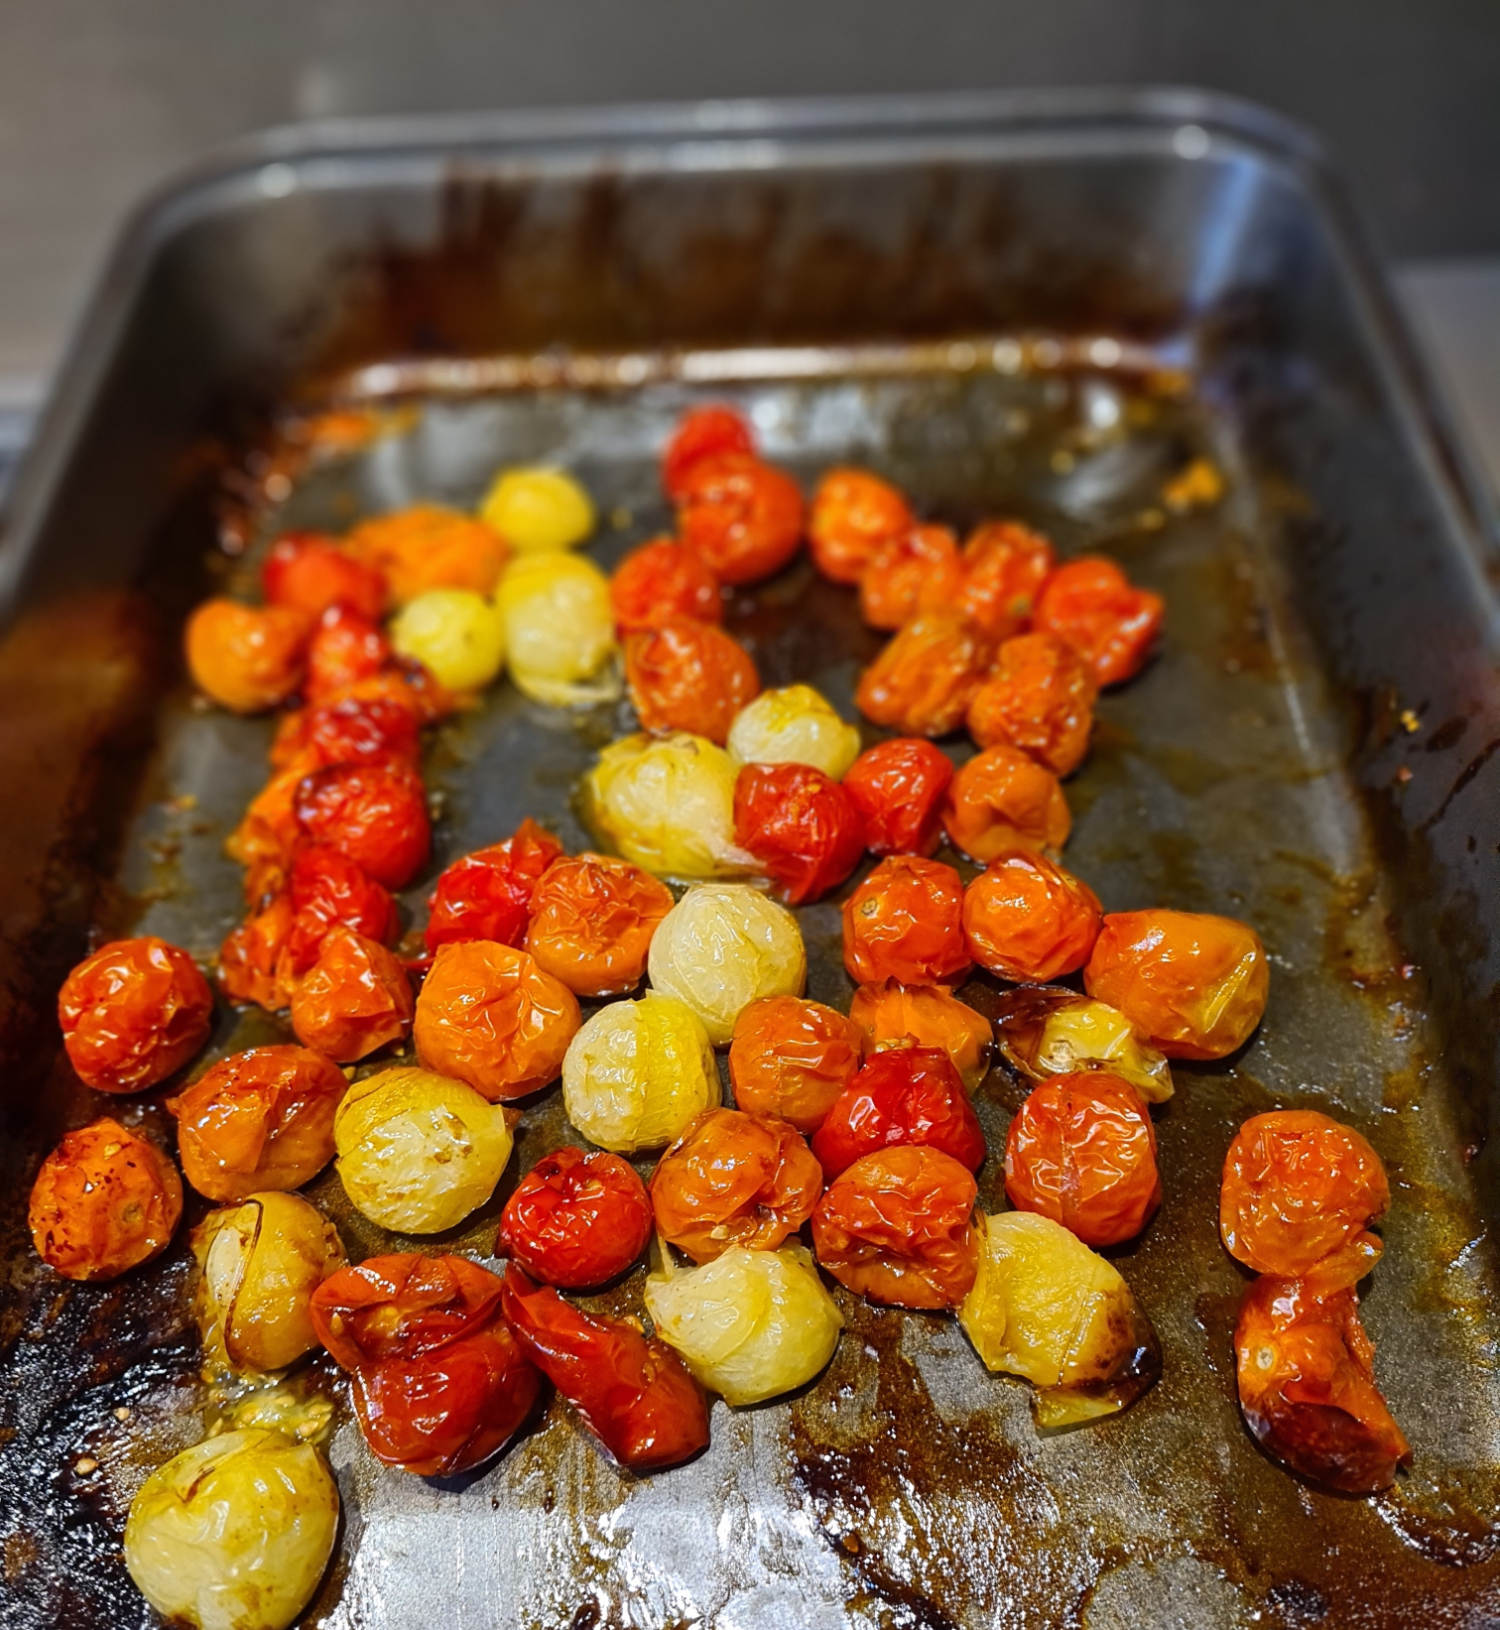 Roasted toms